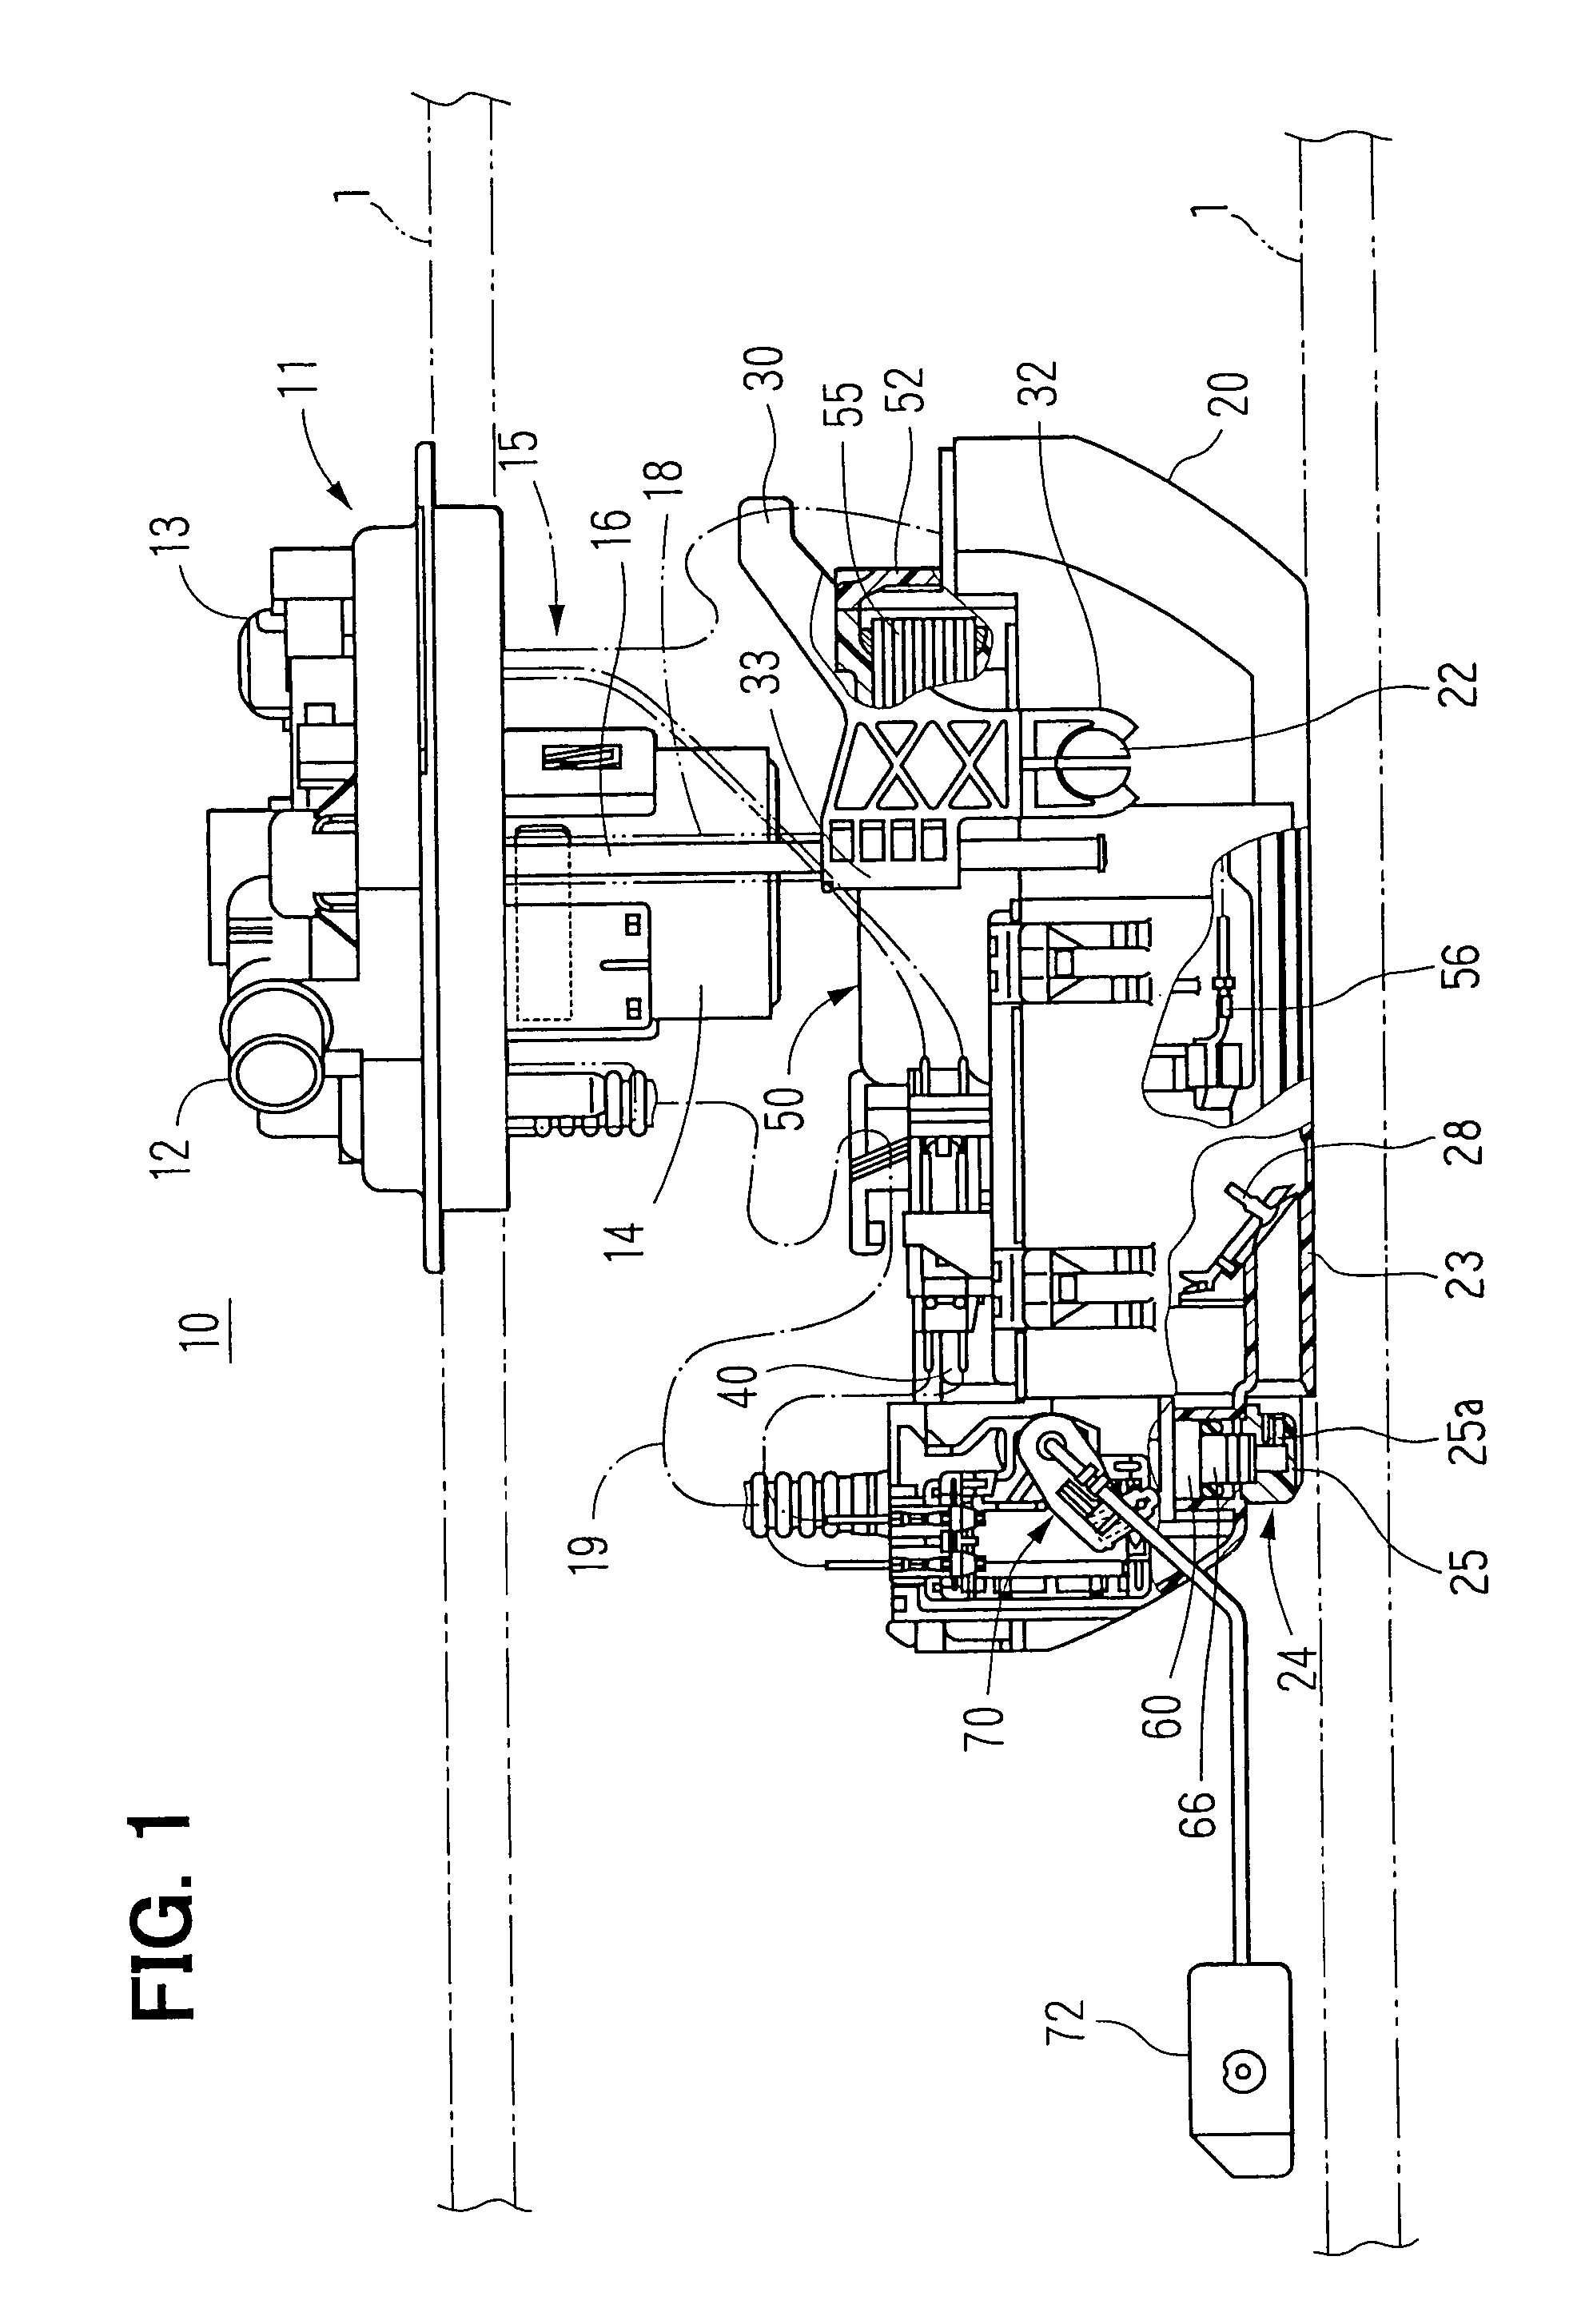 Fuel feed apparatus having conductive members grounded each other